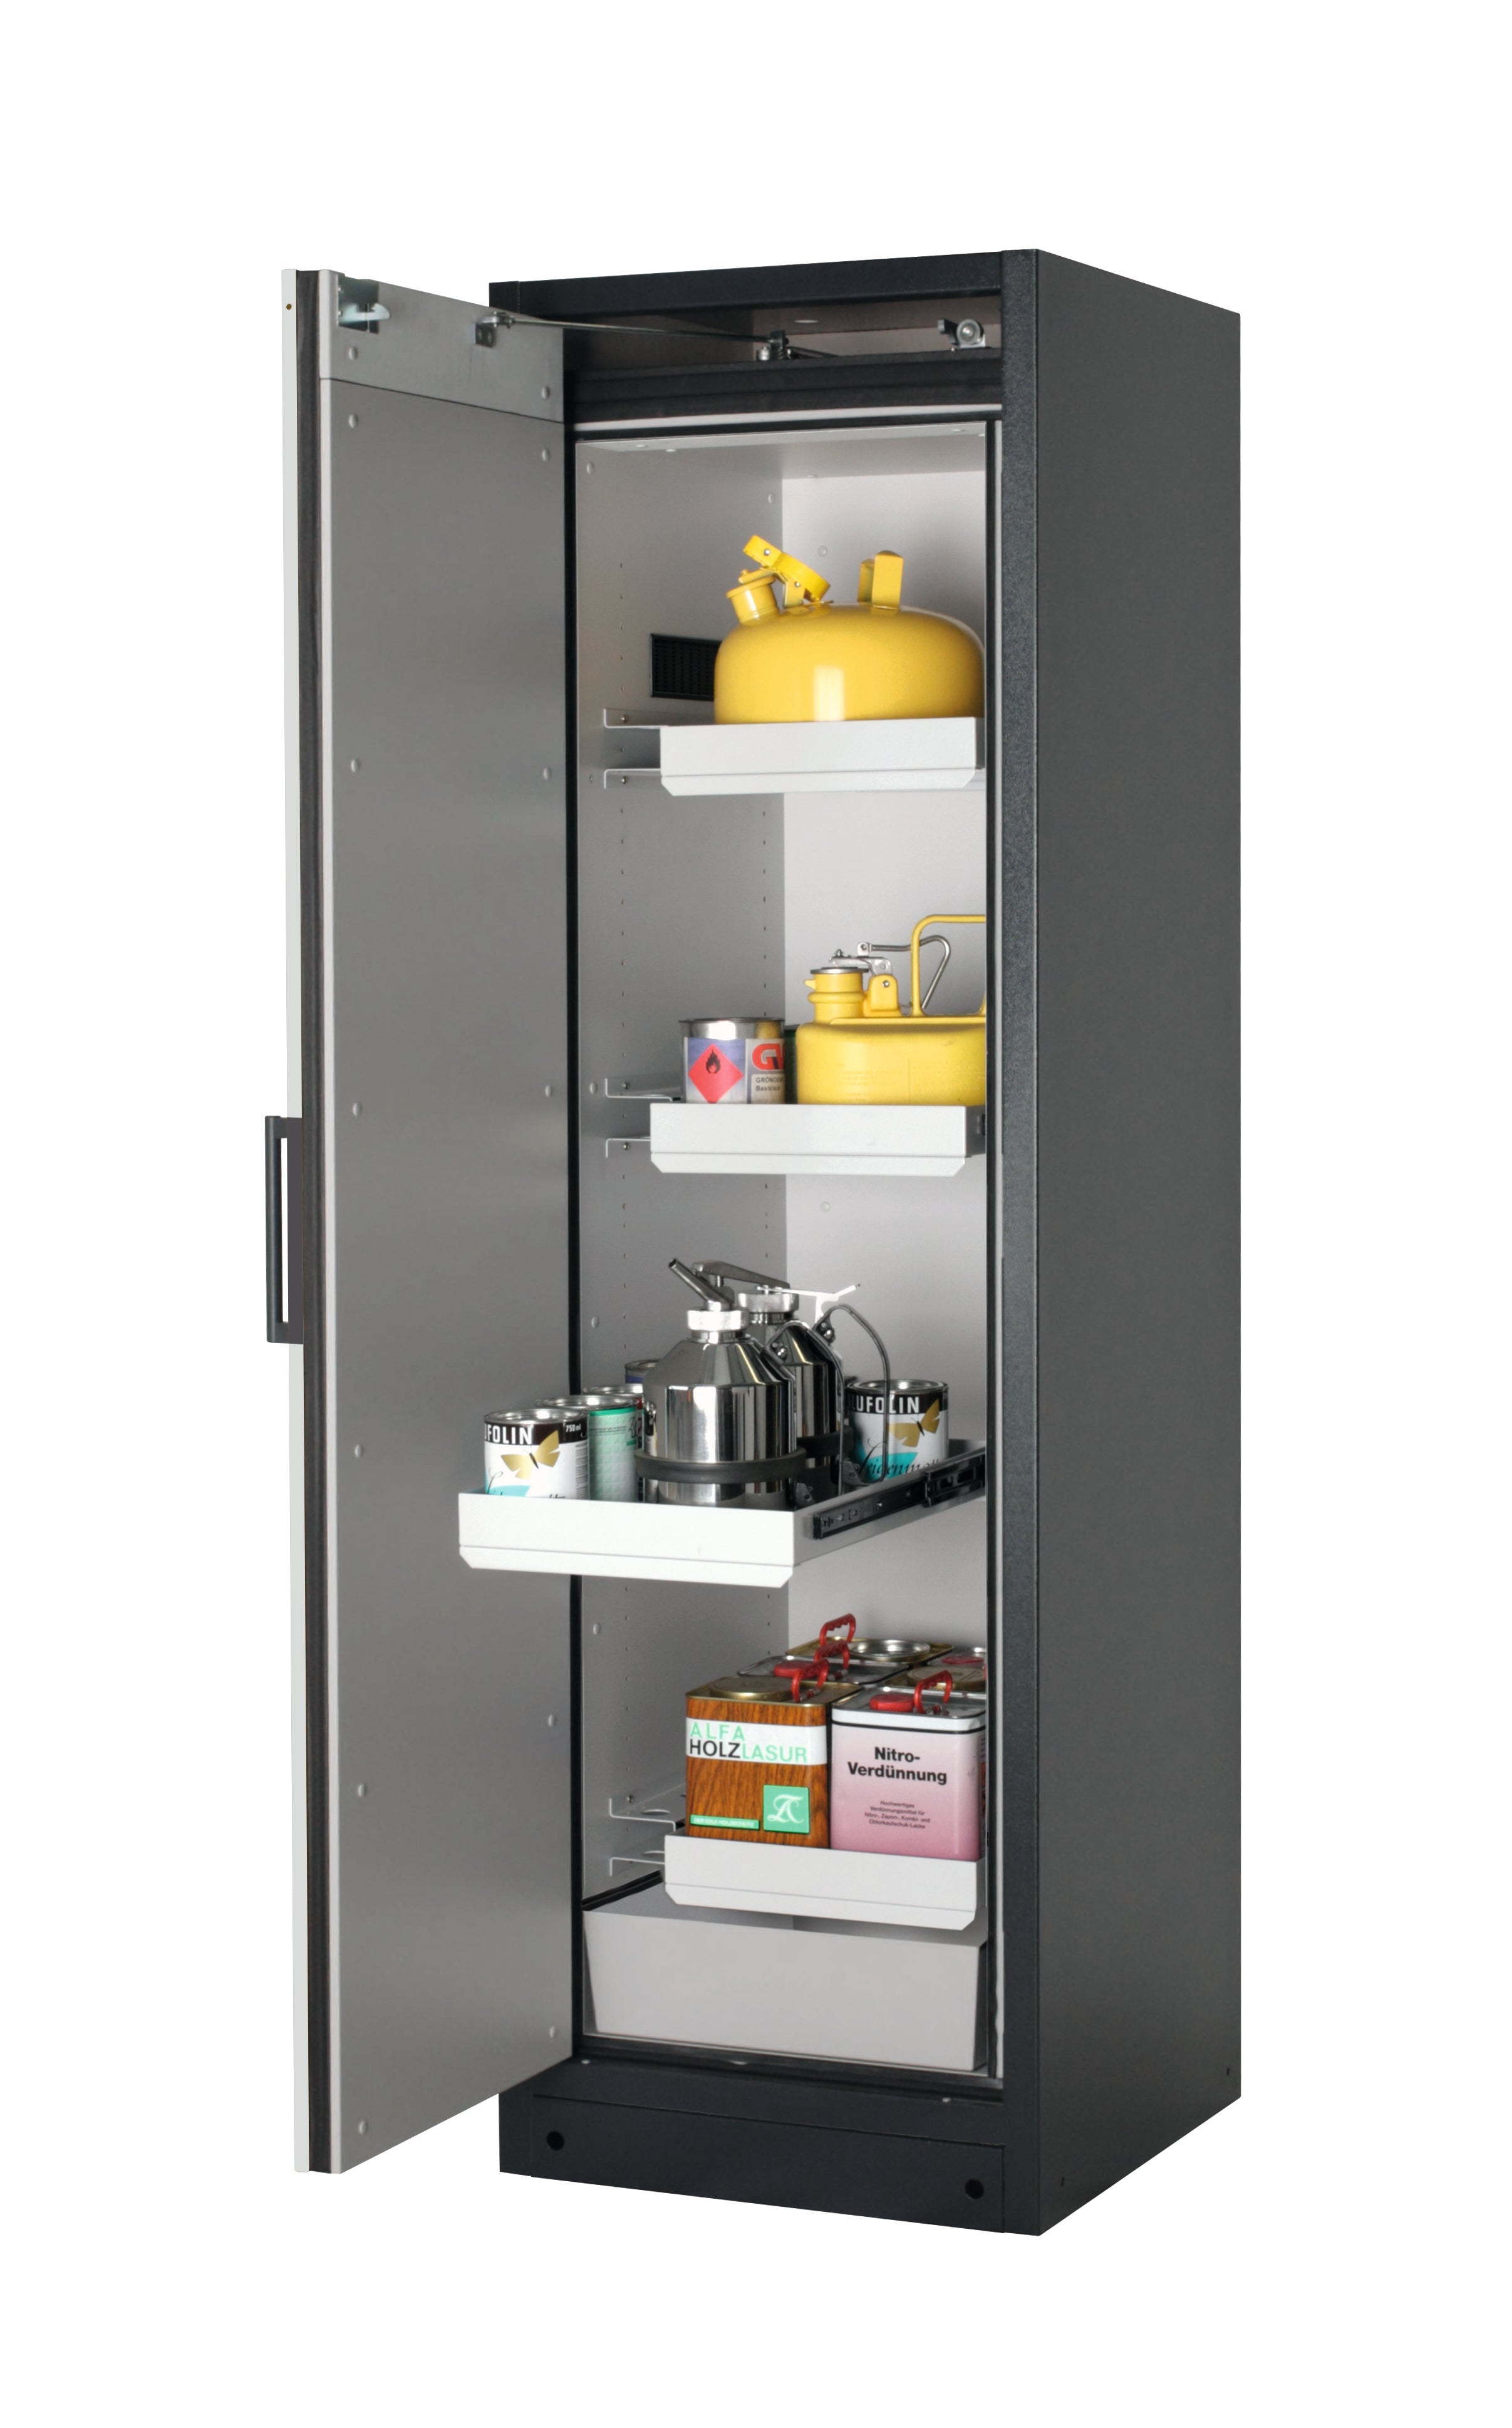 Type 90 safety storage cabinet Q-PEGASUS-90 model Q90.195.060.WDAC in light grey RAL 7035 with 3x drawer (standard) (sheet steel),